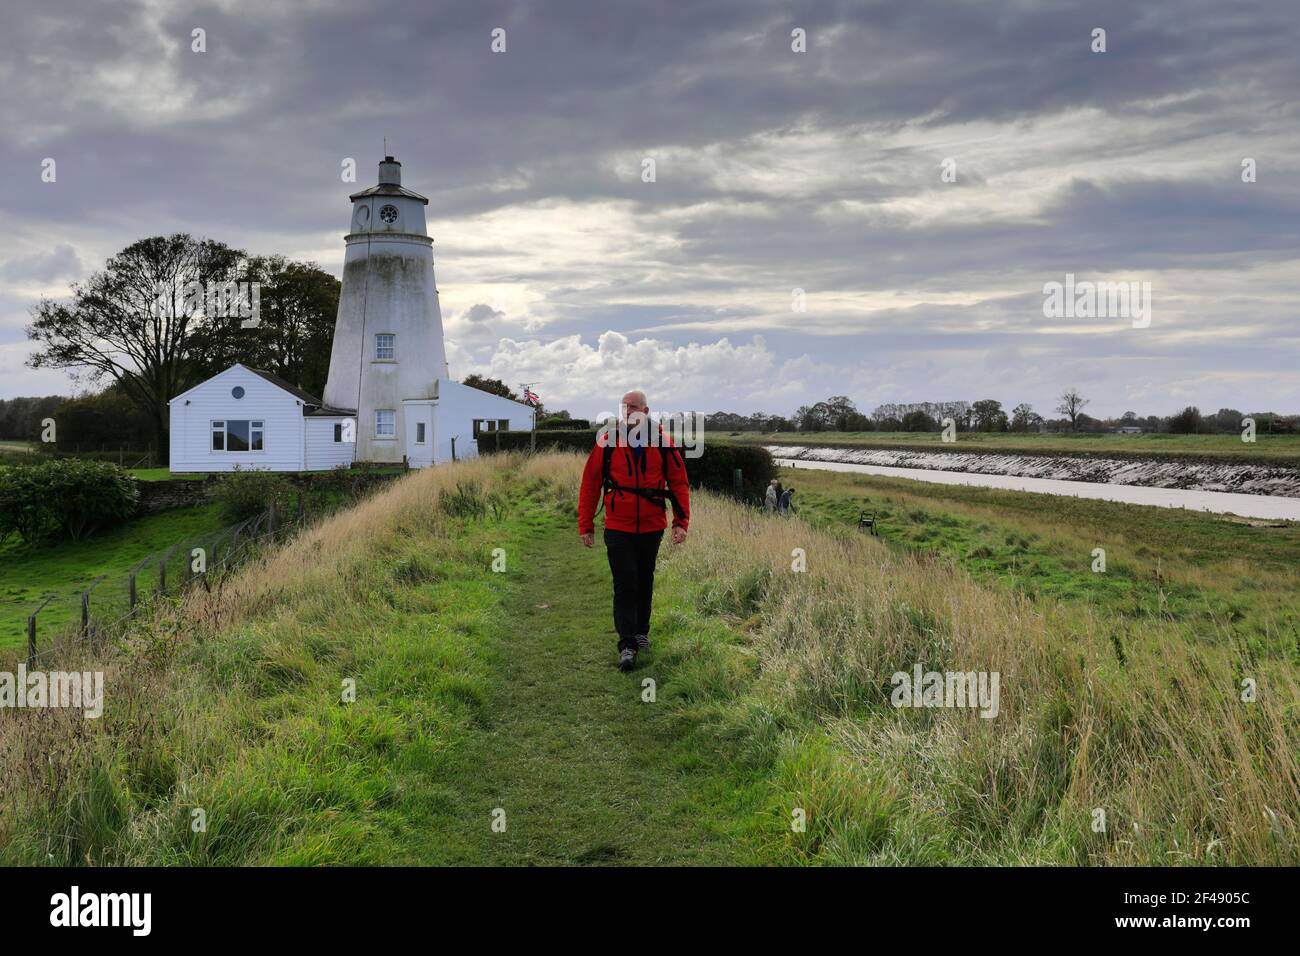 Walker at the Sir Peter Scott Lighthouse, known as the East Lighthouse, River Nene, Sutton Bridge village, South Holland district, Lincolnshire, Engla Stock Photo